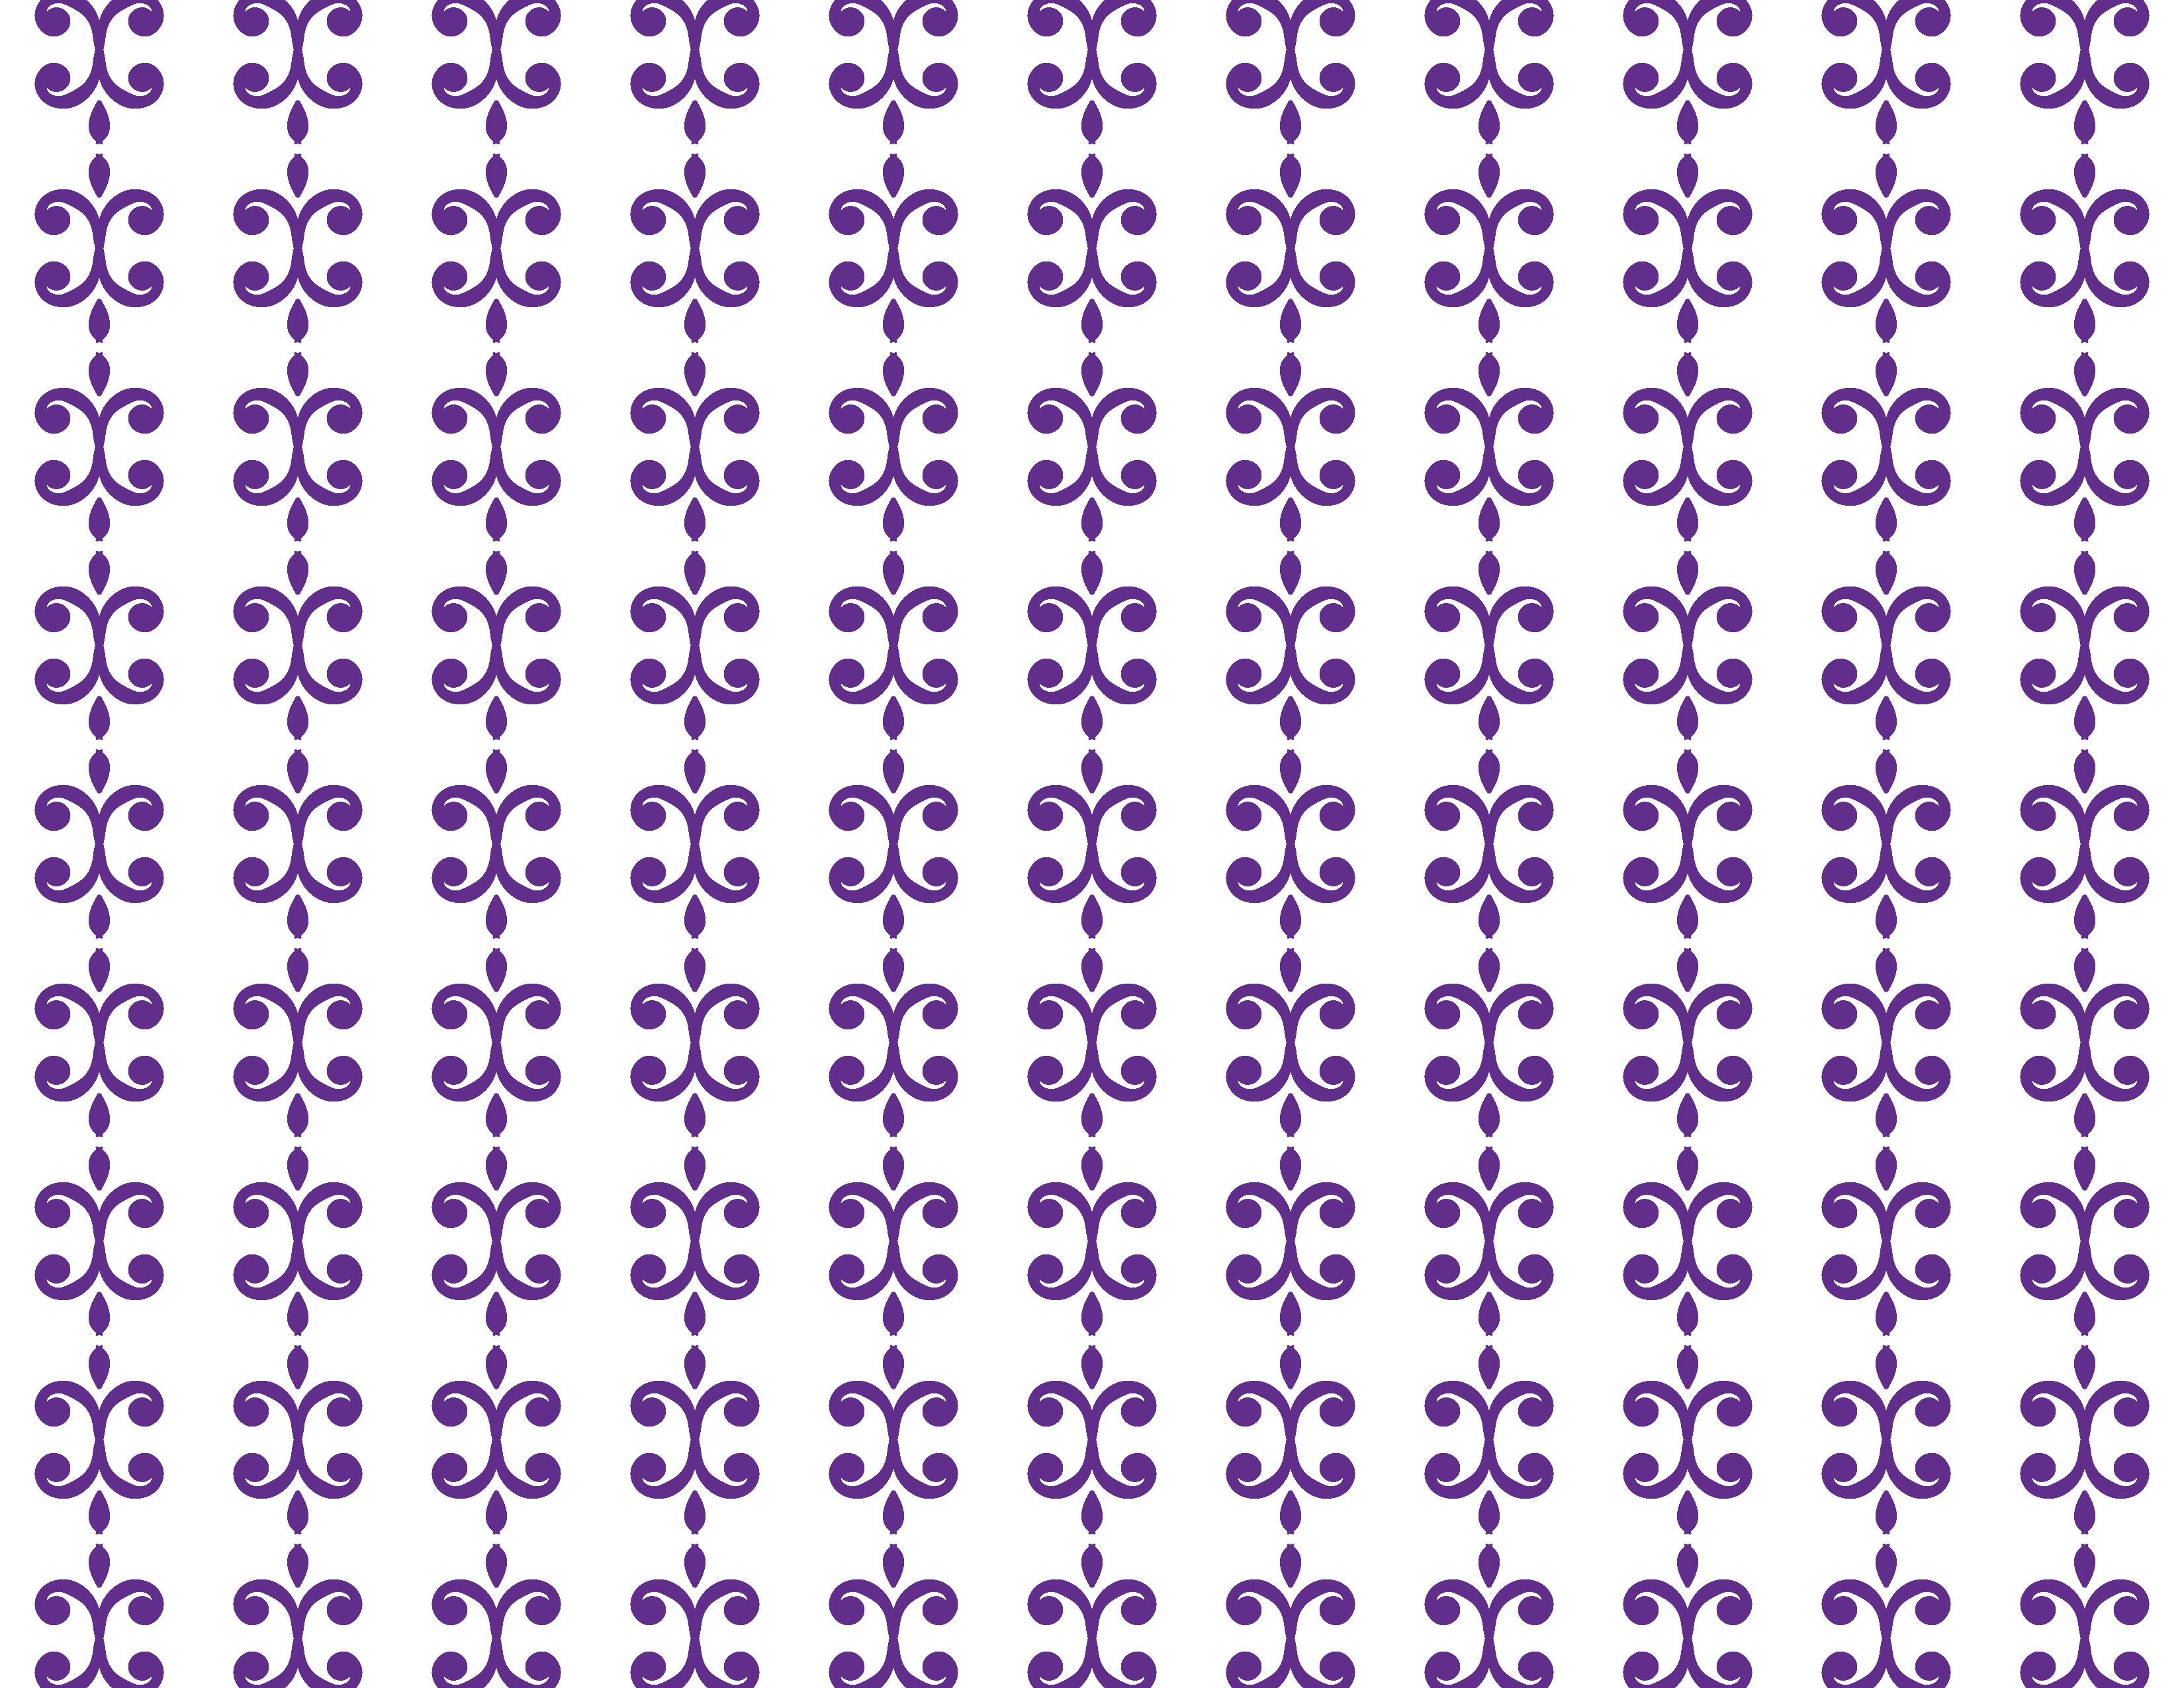 seamless repeated pattern background free download